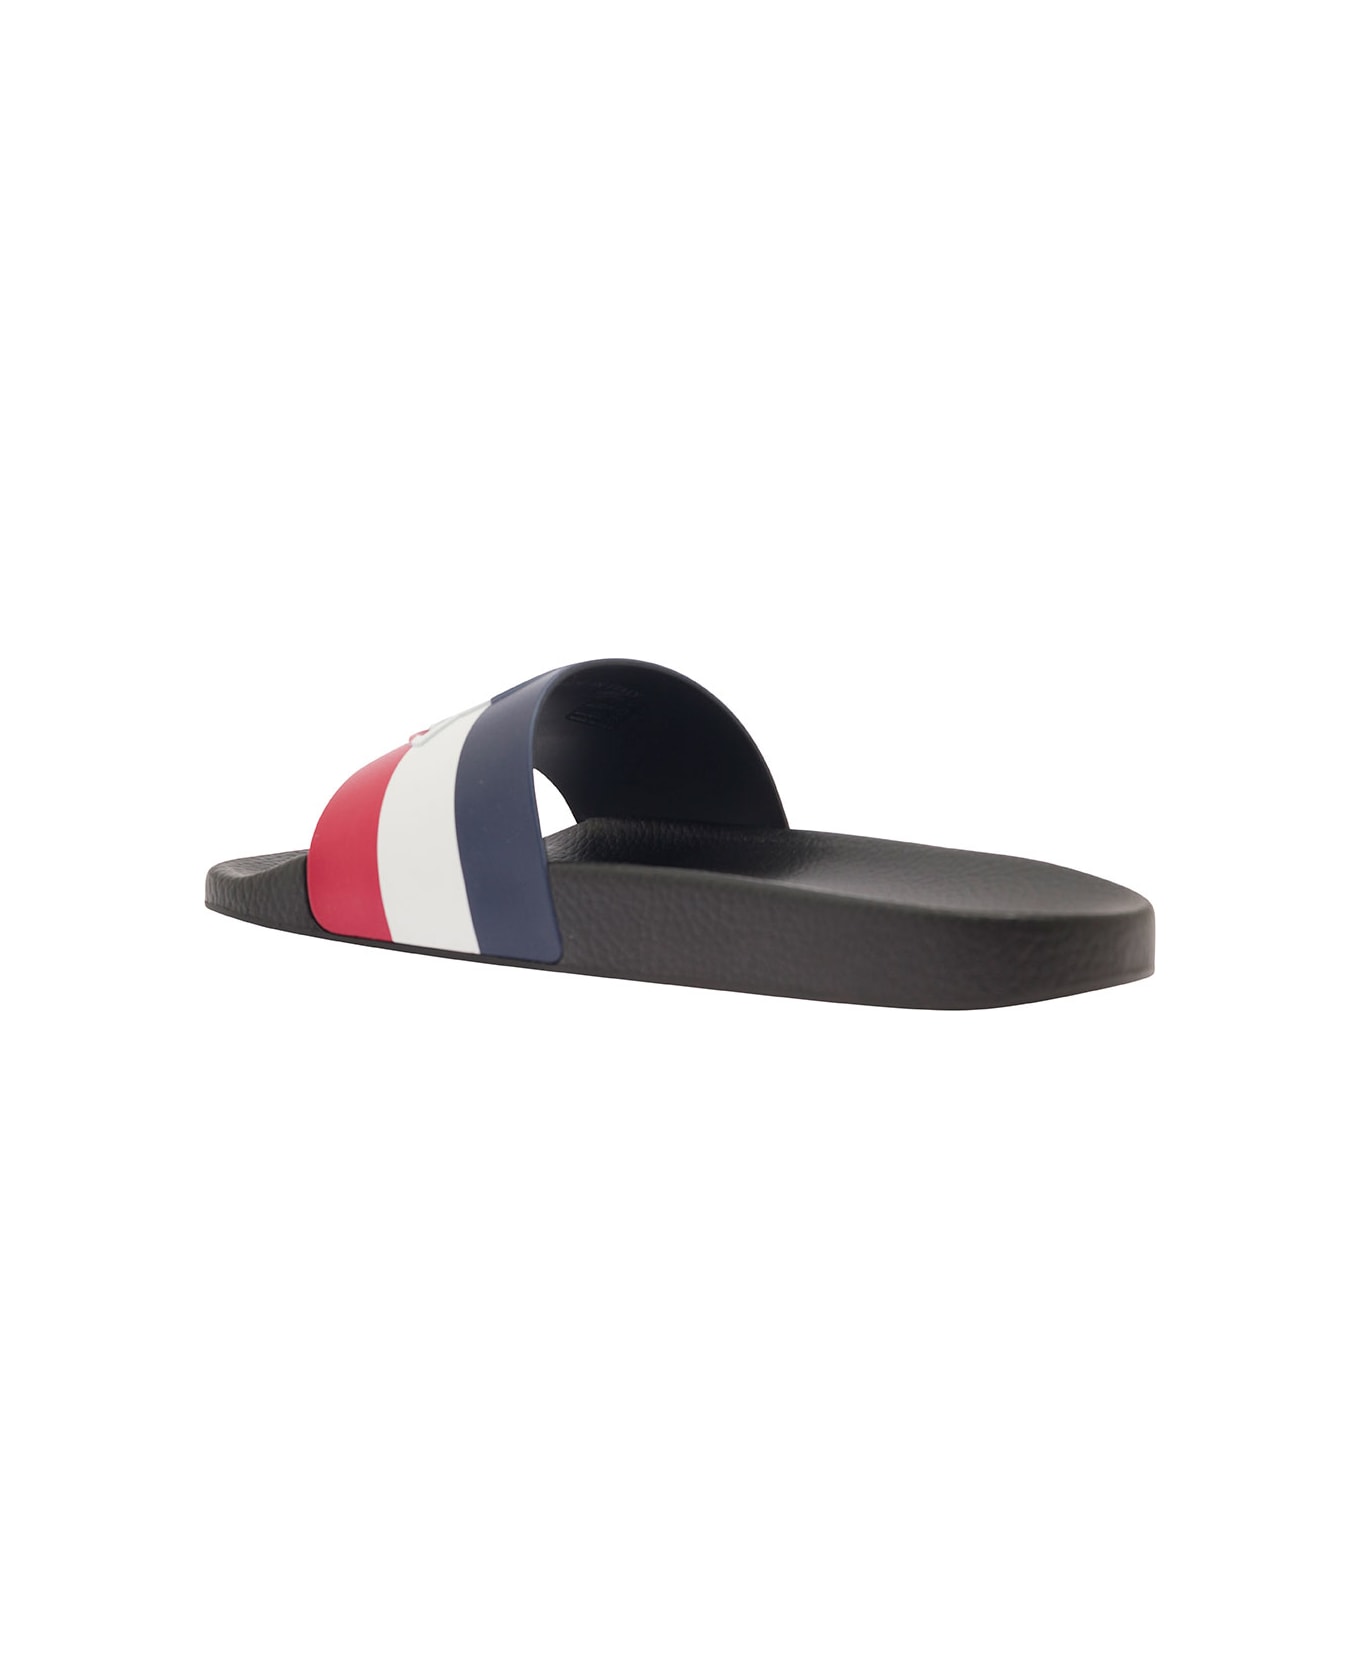 Moncler 'basile' Blue Slides With Tricolour Toe Strap In Rubber Man - Blu/rosso/bianco